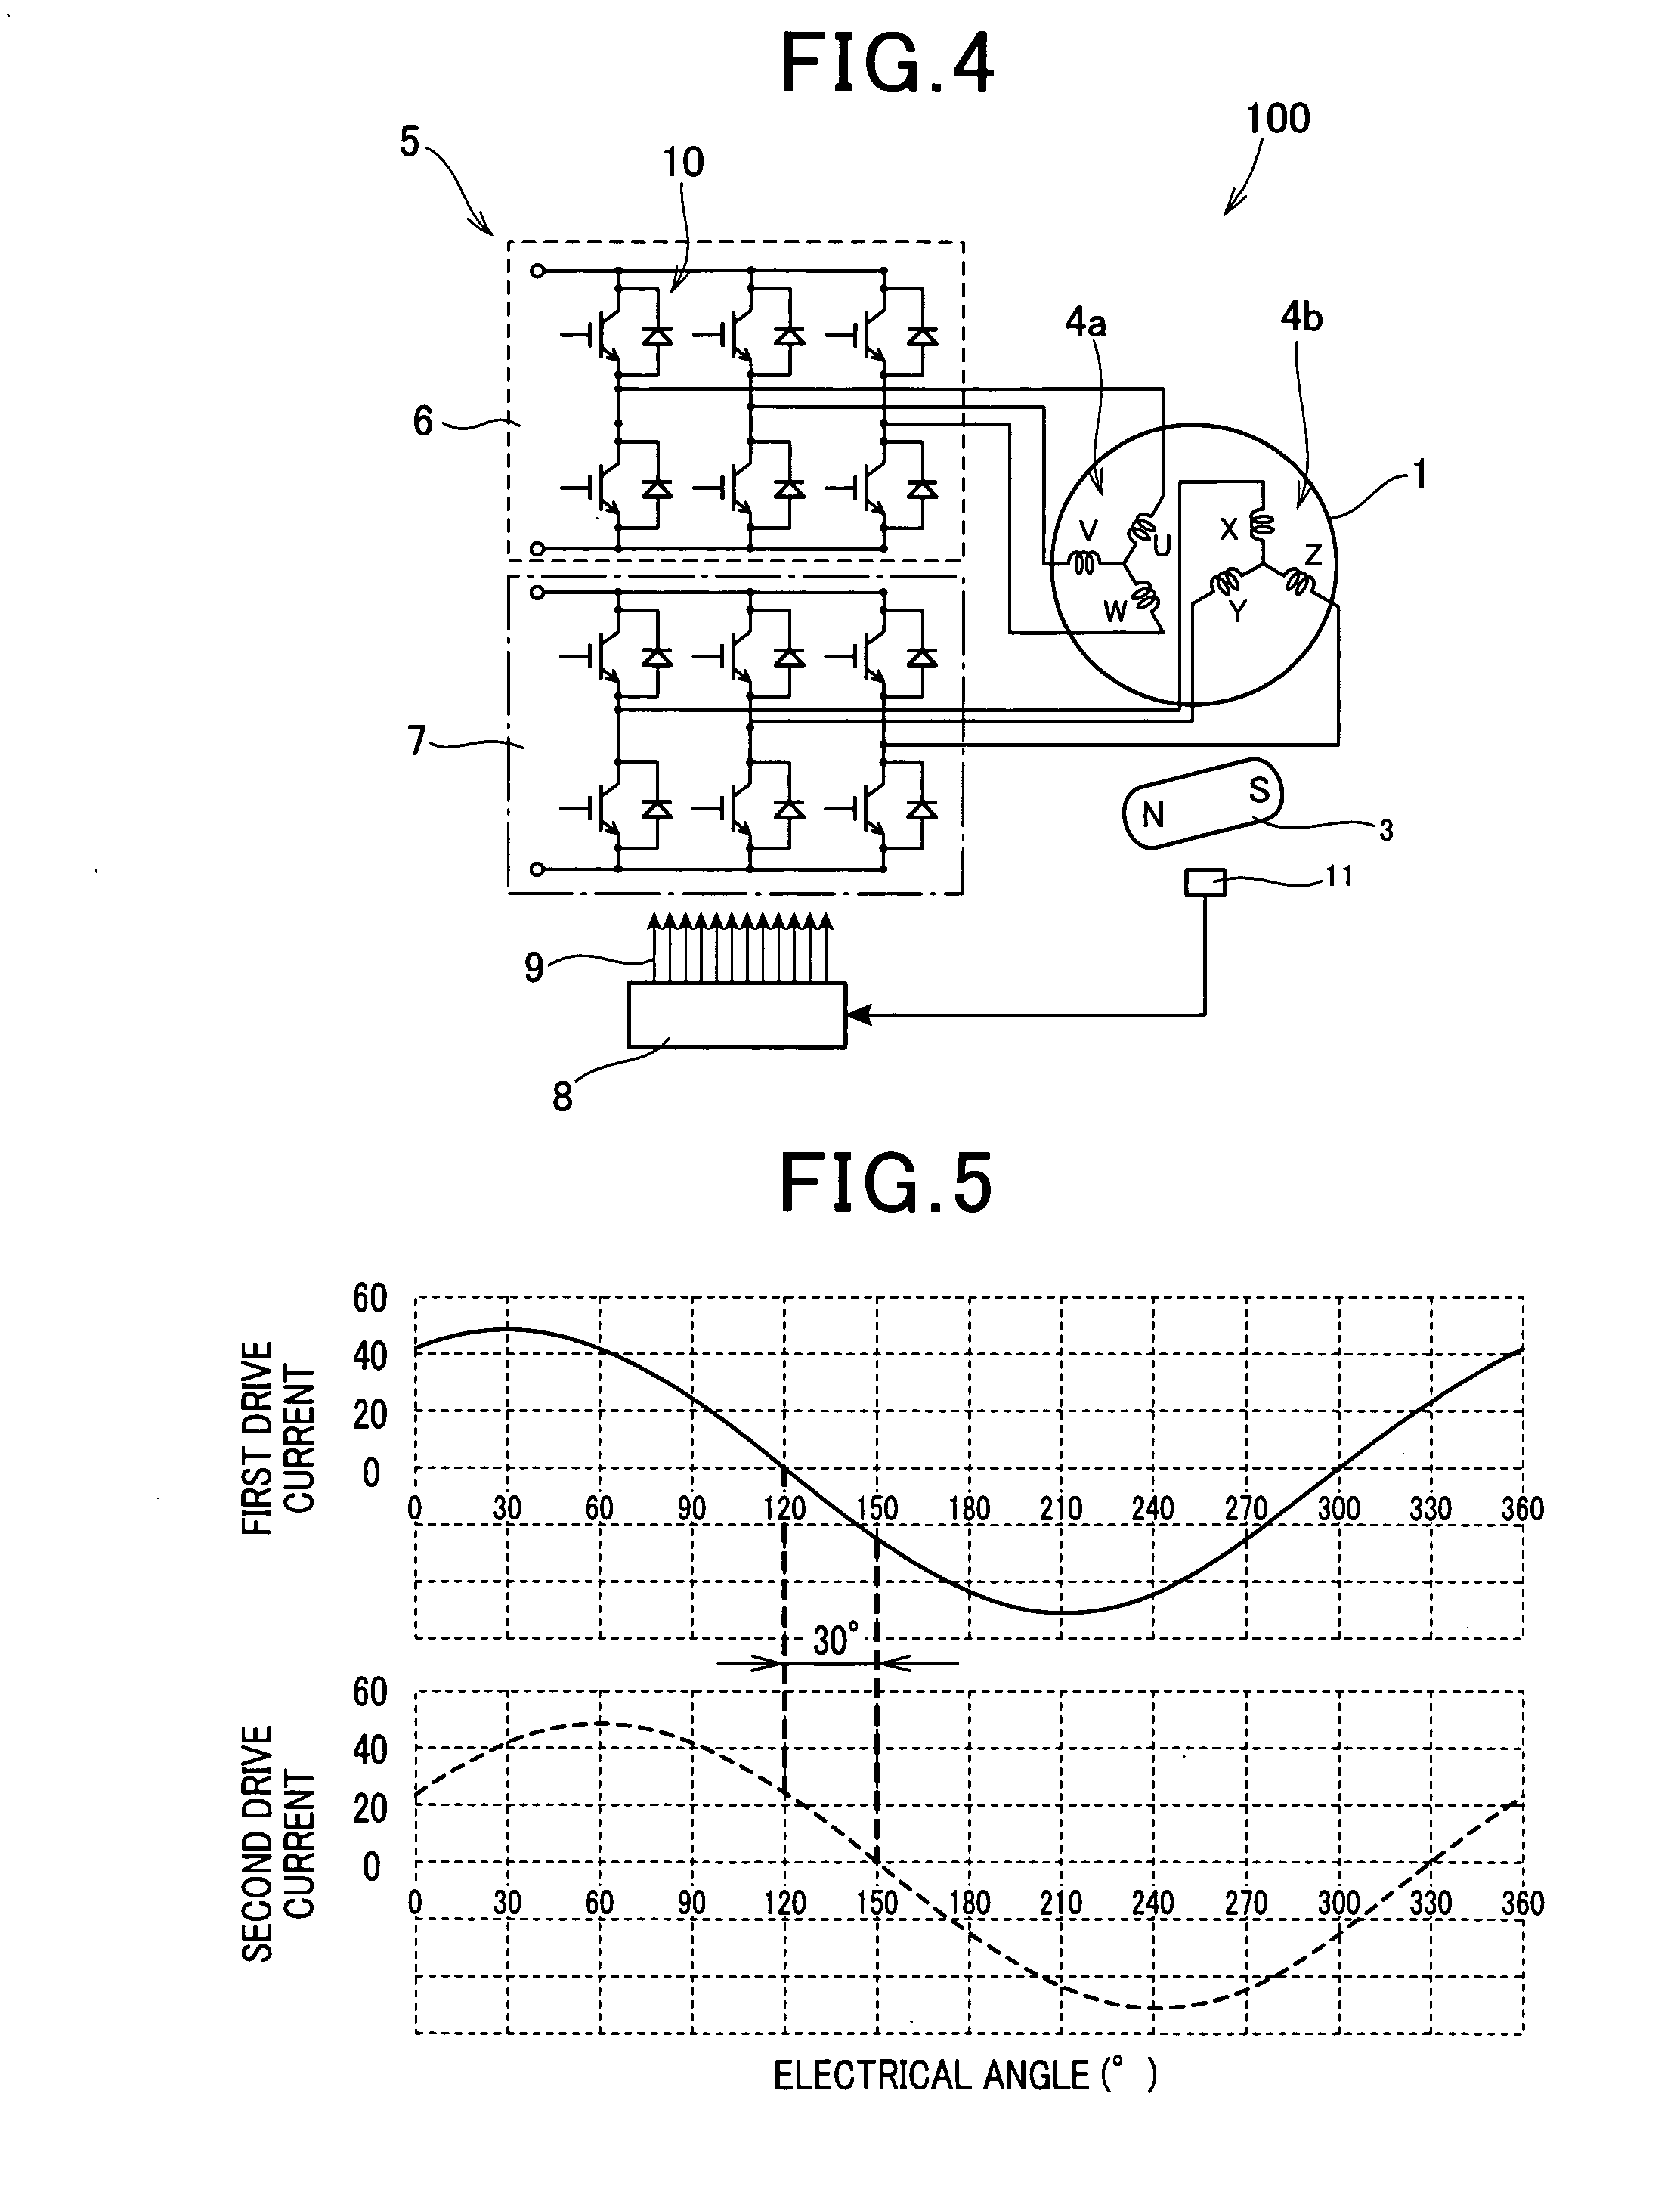 Electric rotating machine having improved stator coil arrangement for reducing magnetic noise and torque ripple